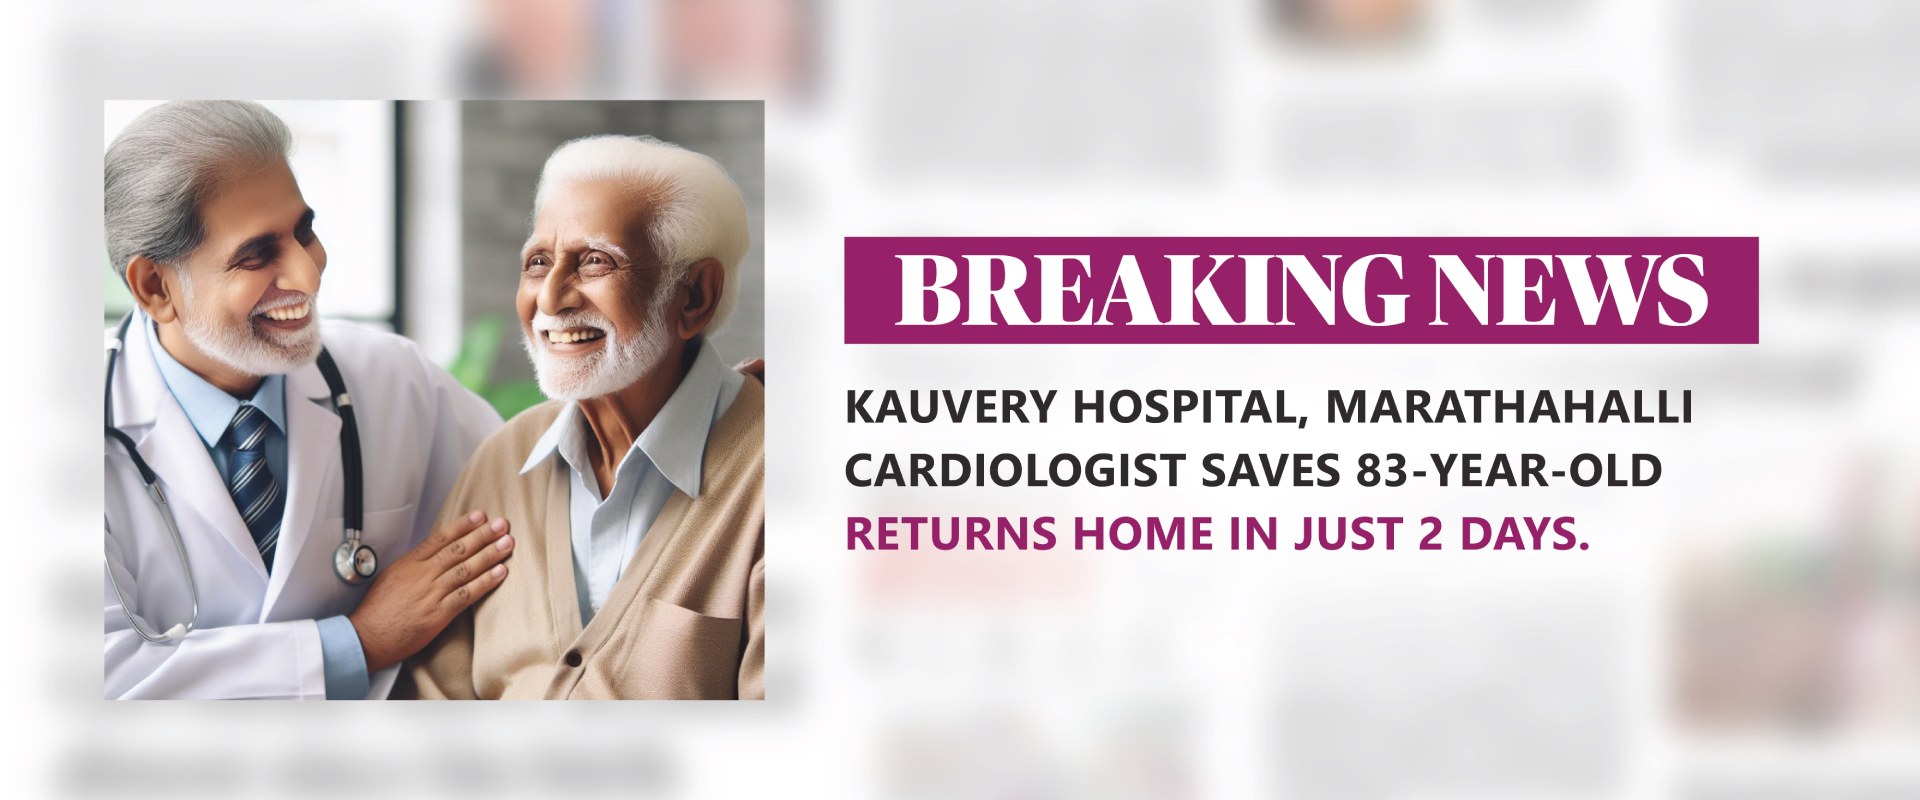 From Pain to Triumph: 83-Year-Old's Remarkable Journey Through Life Saving Procedure At Kauvery Hospital